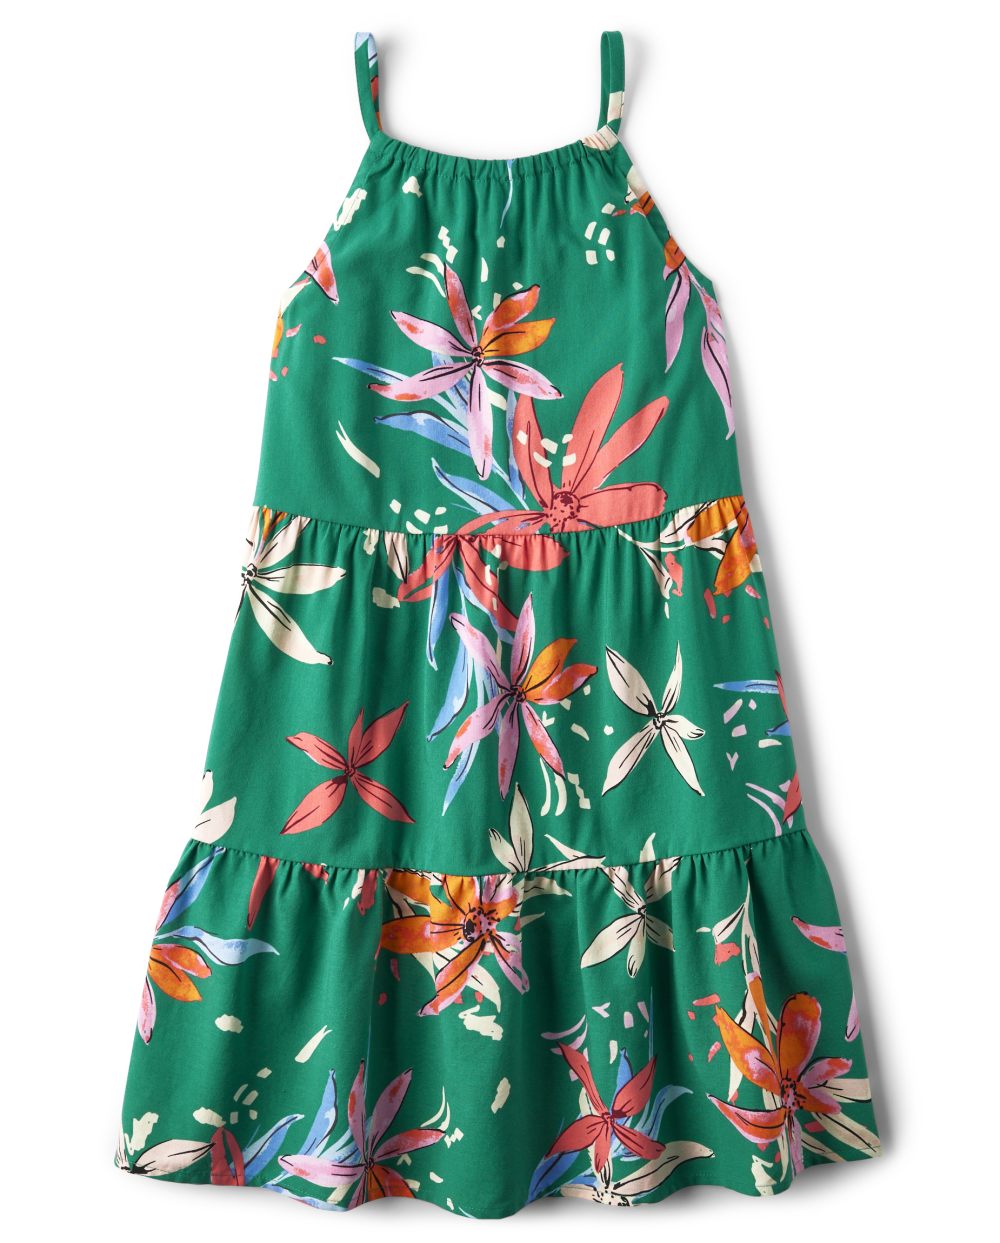 Girls Tiered Above the Knee Sleeveless Floral Tropical Print Halter Dress